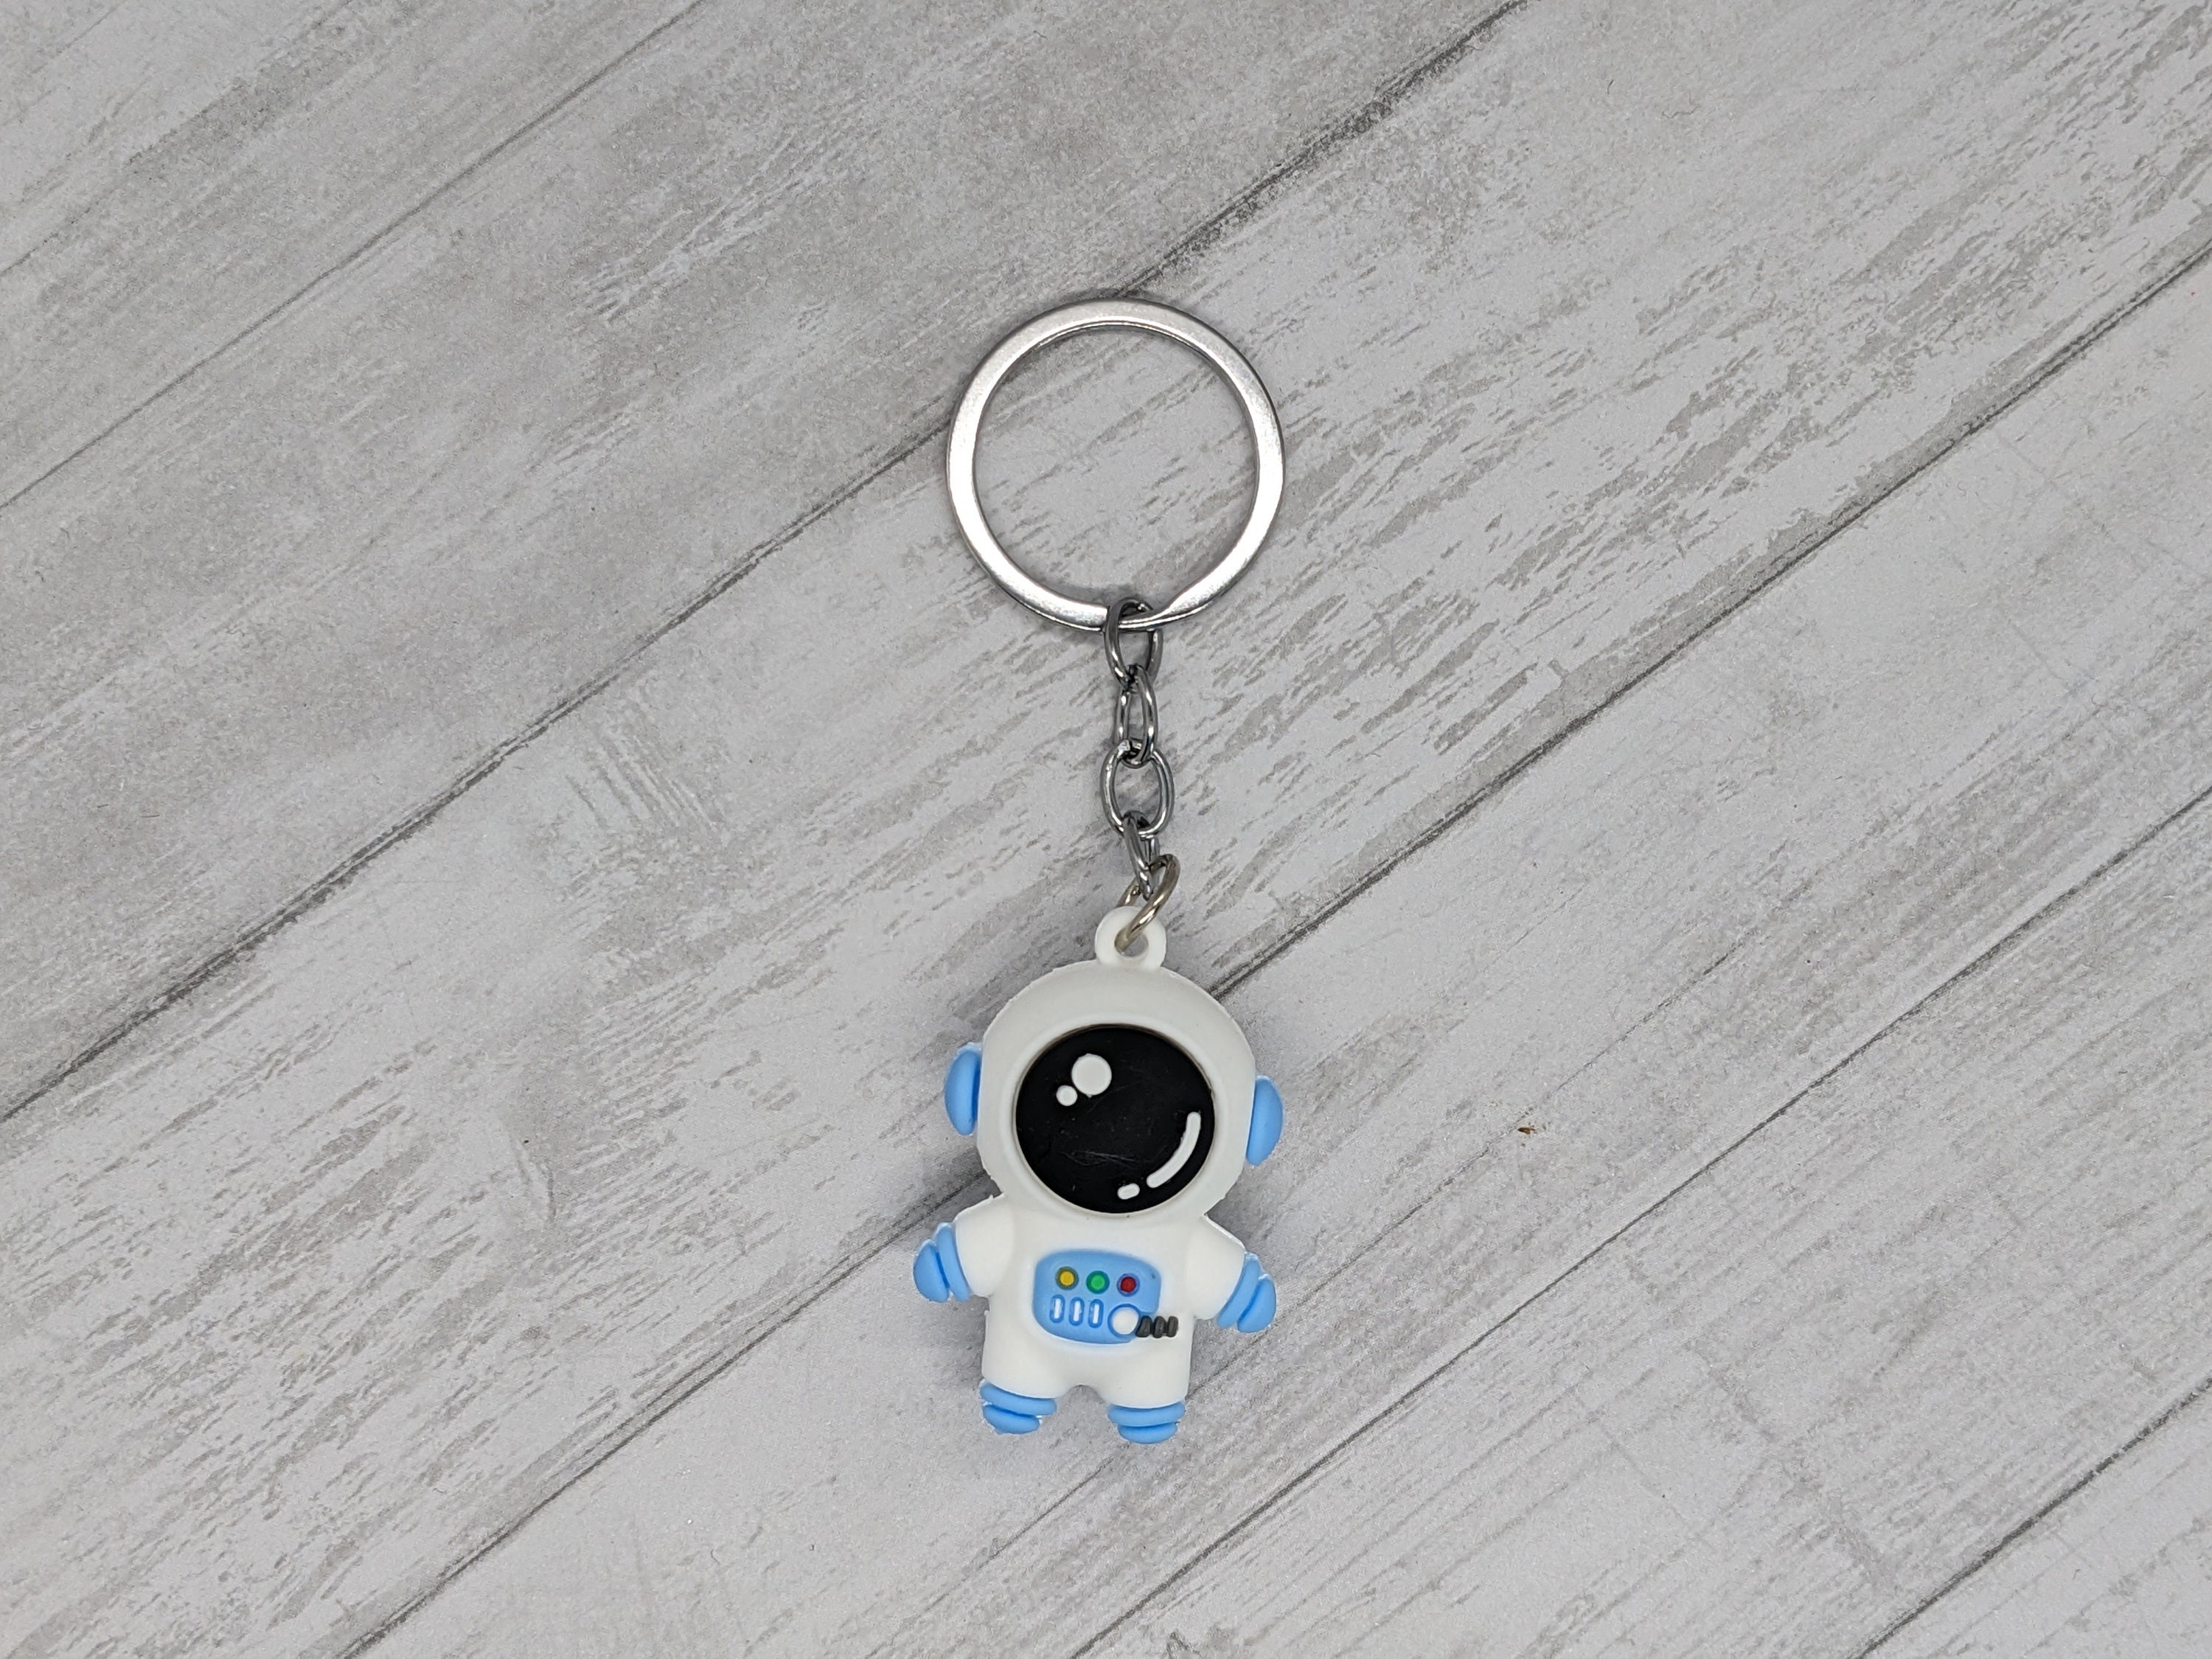 Astronaut Astronaut Keychain Bag Pendant Original Car Decoration And  Luggage Bag Parts Accessory With Gift Box From Emma_fashion, $17.7